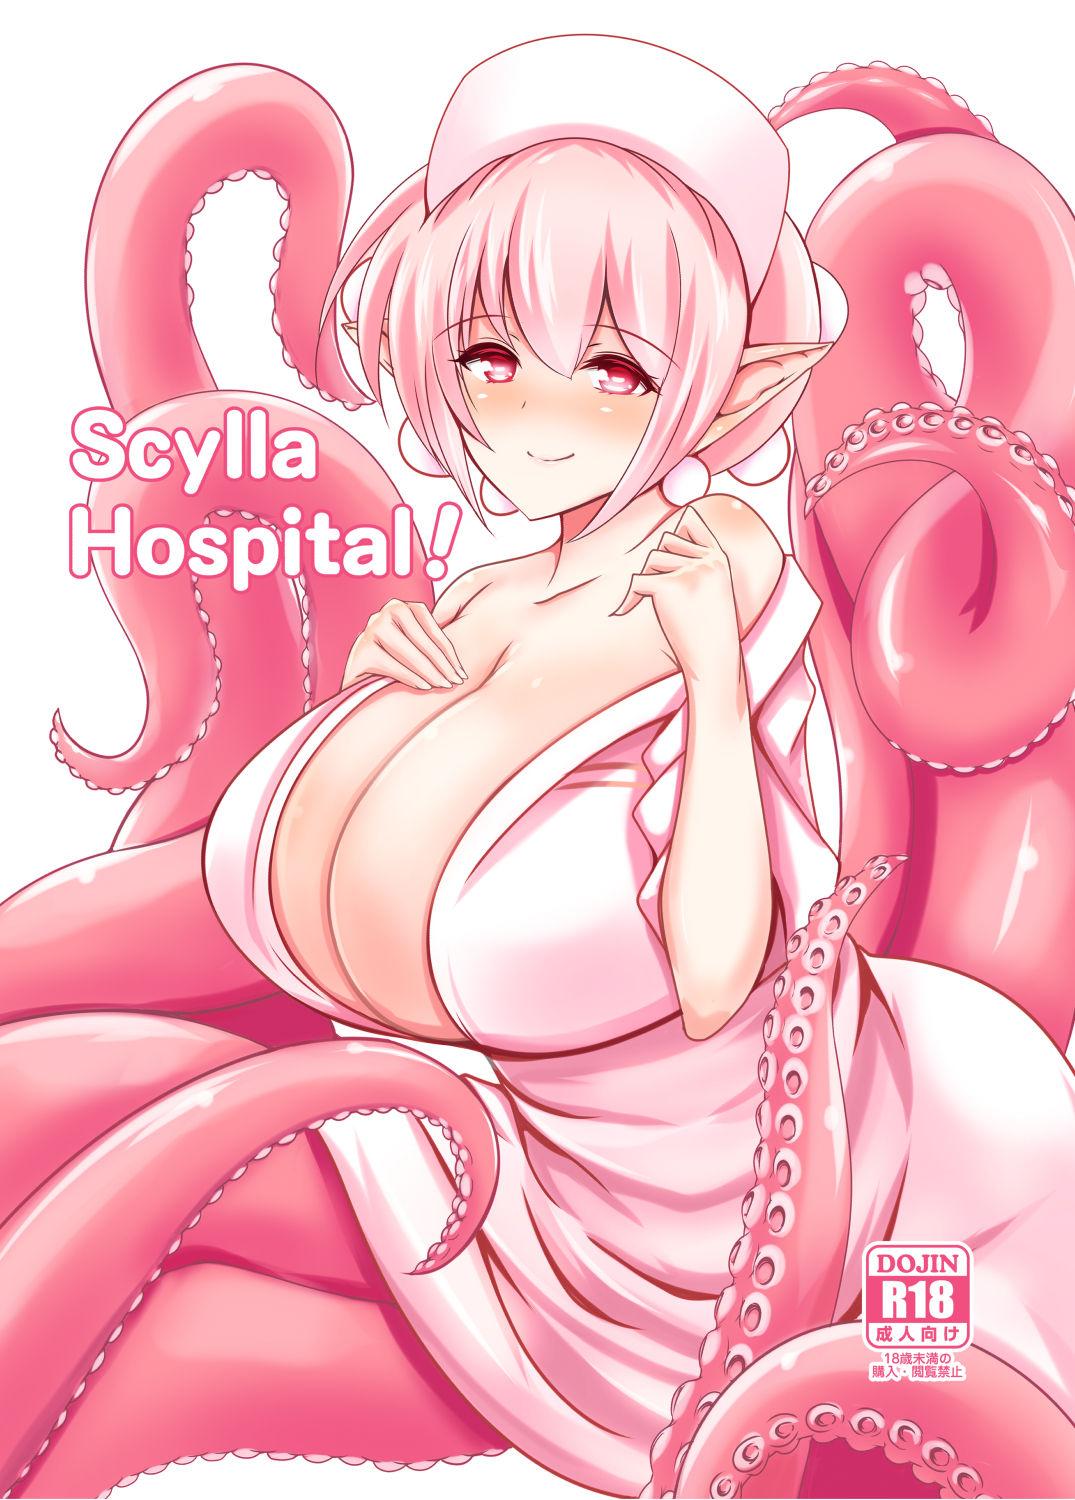 Real Couple Scylla Hospital! - Original Stroking - Picture 1